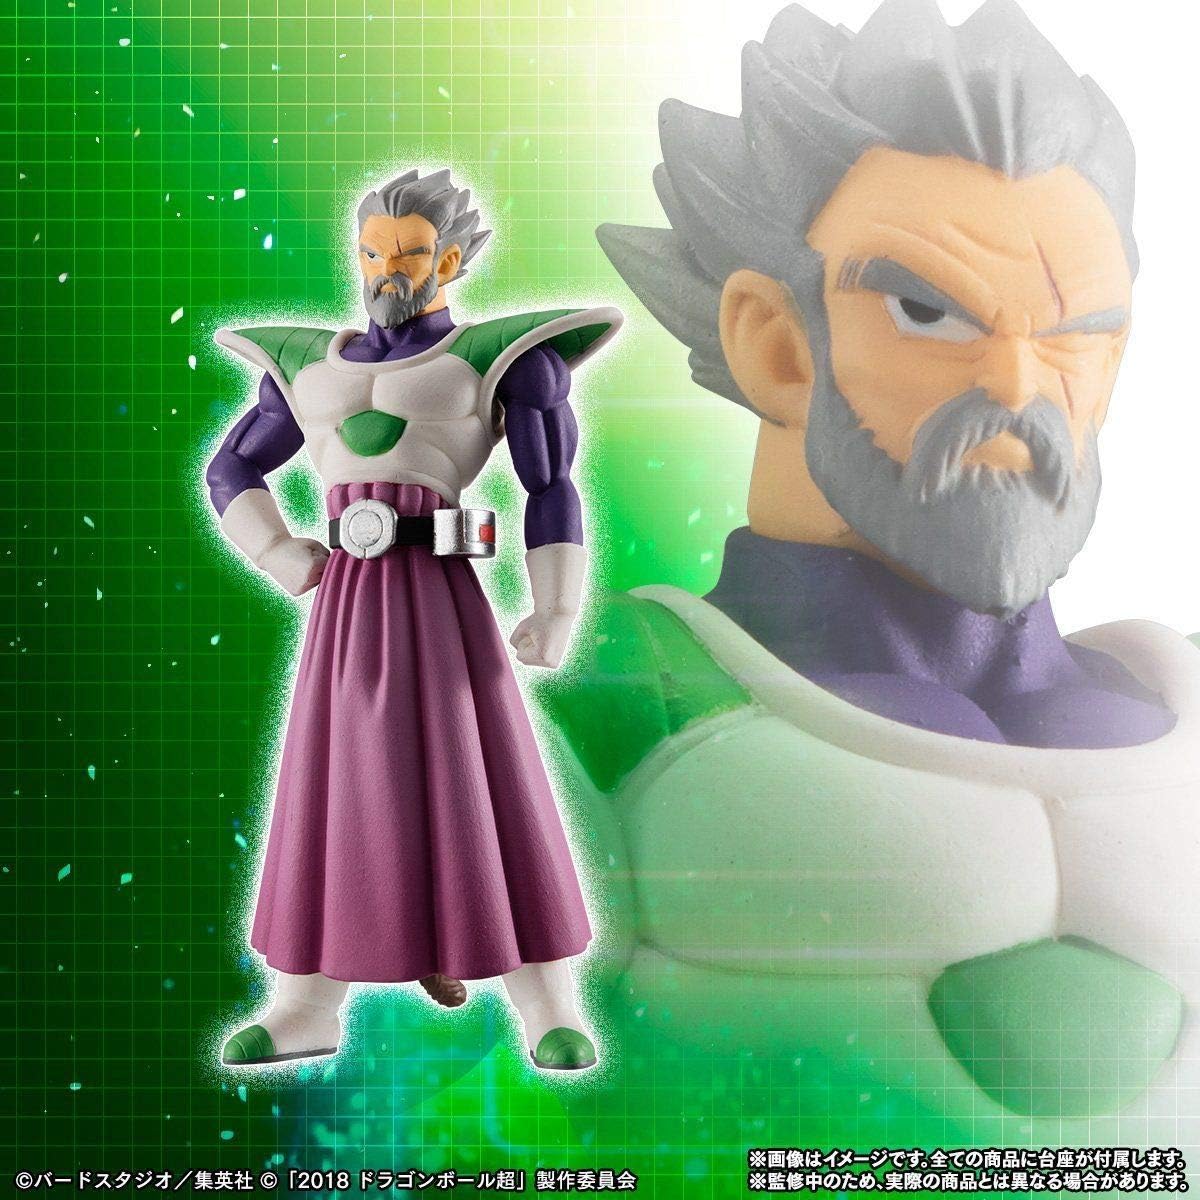 HG Dragon Ball Super Movie Enemy Set Figure: Broly Paragus Frieza with Effect